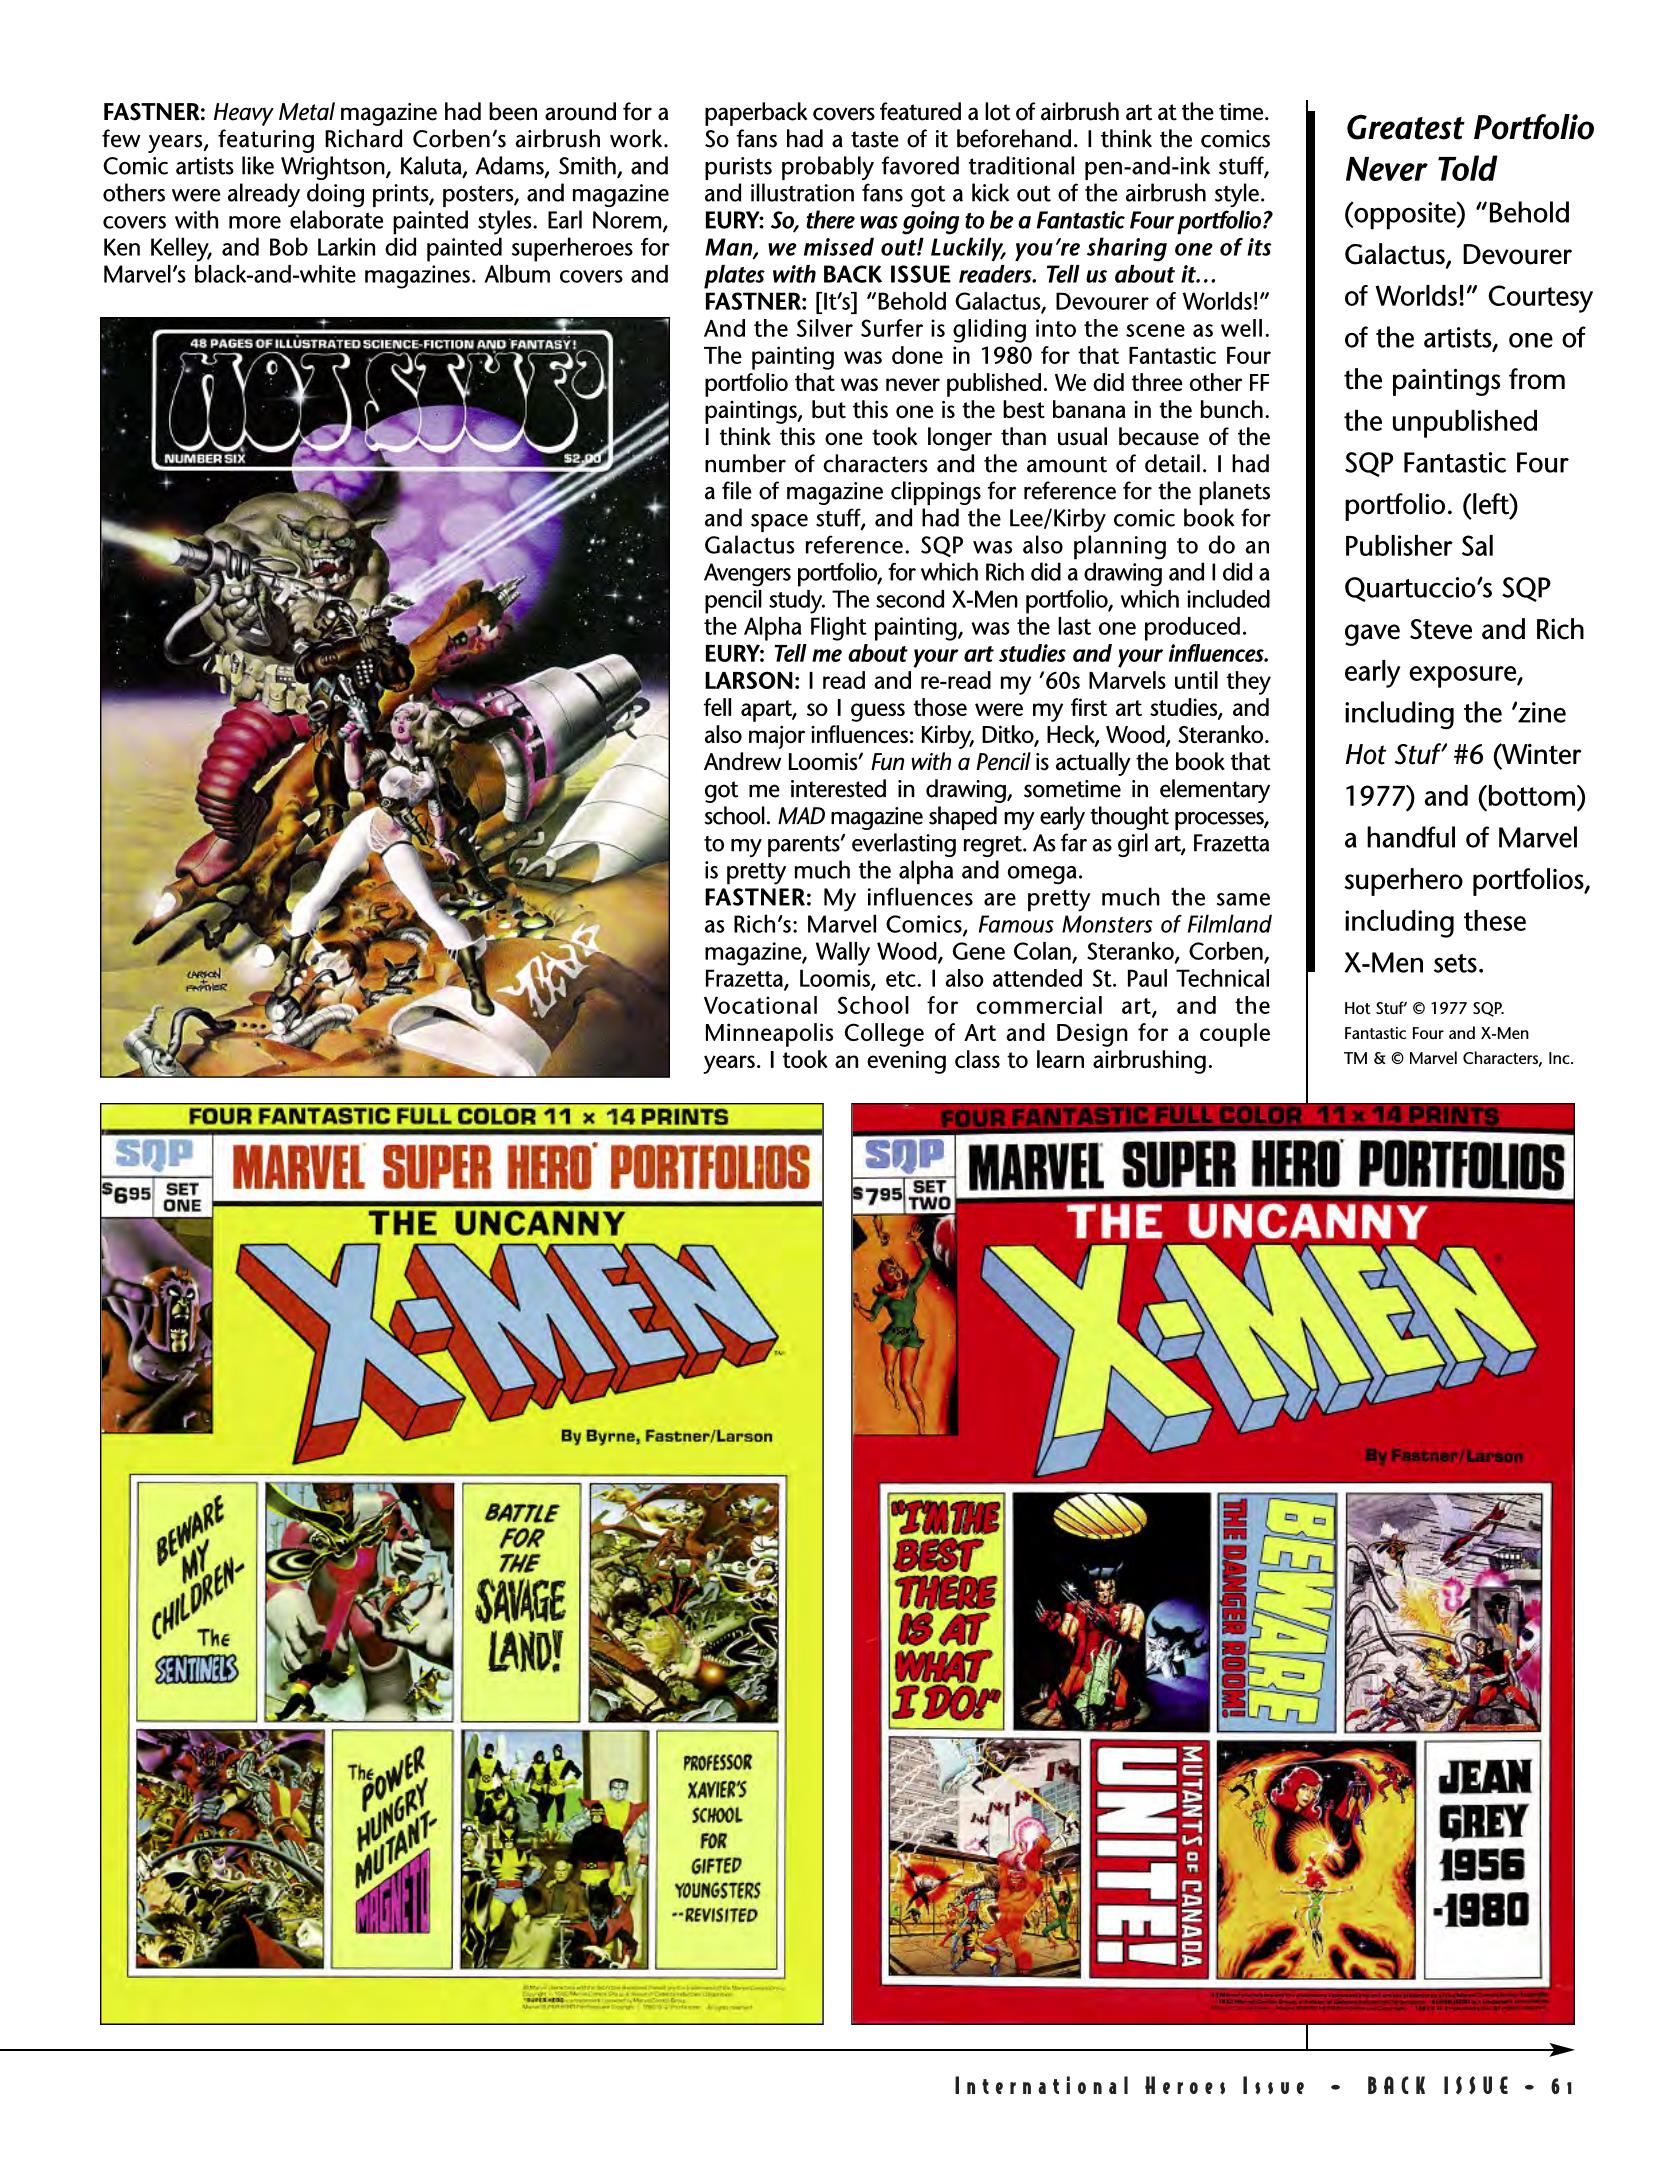 Read online Back Issue comic -  Issue #83 - 63